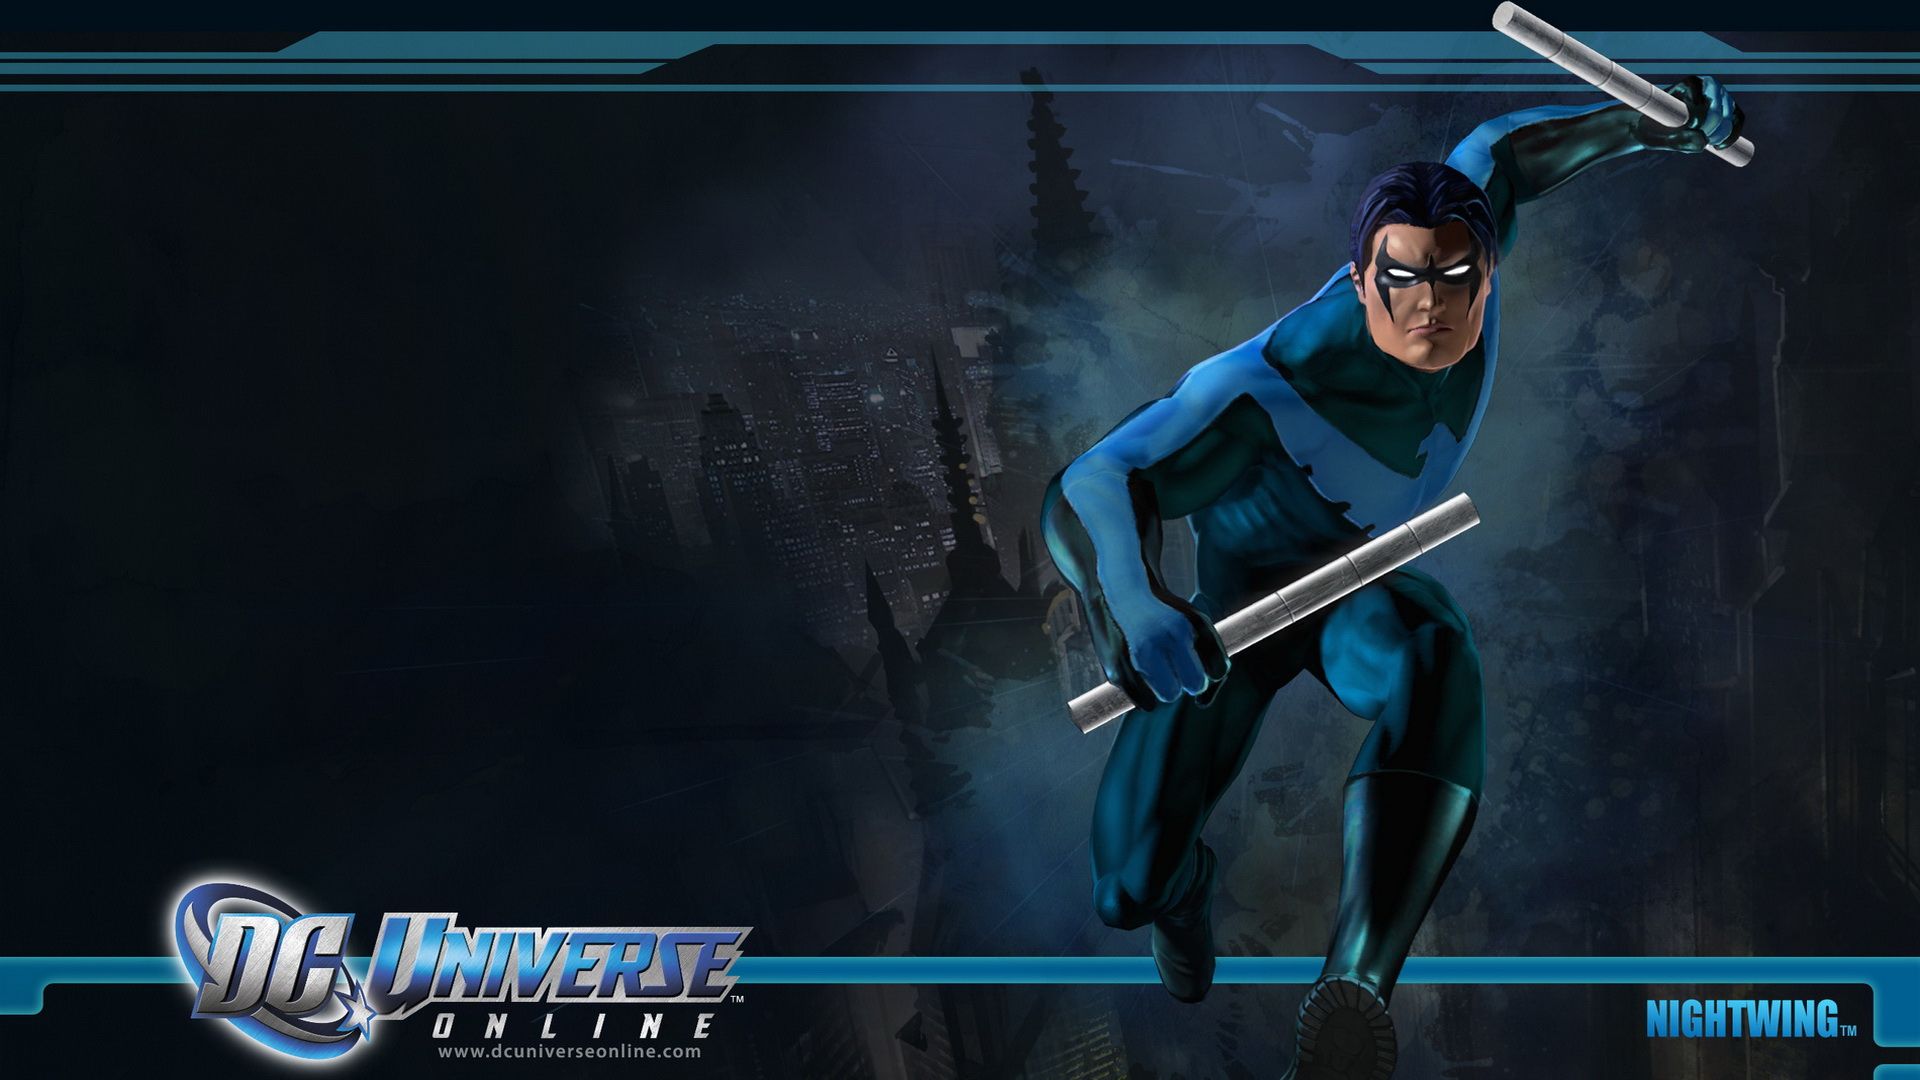 Nightwing 1920x1080 Wallpapers 1920x1080 Wallpapers Pictures Free